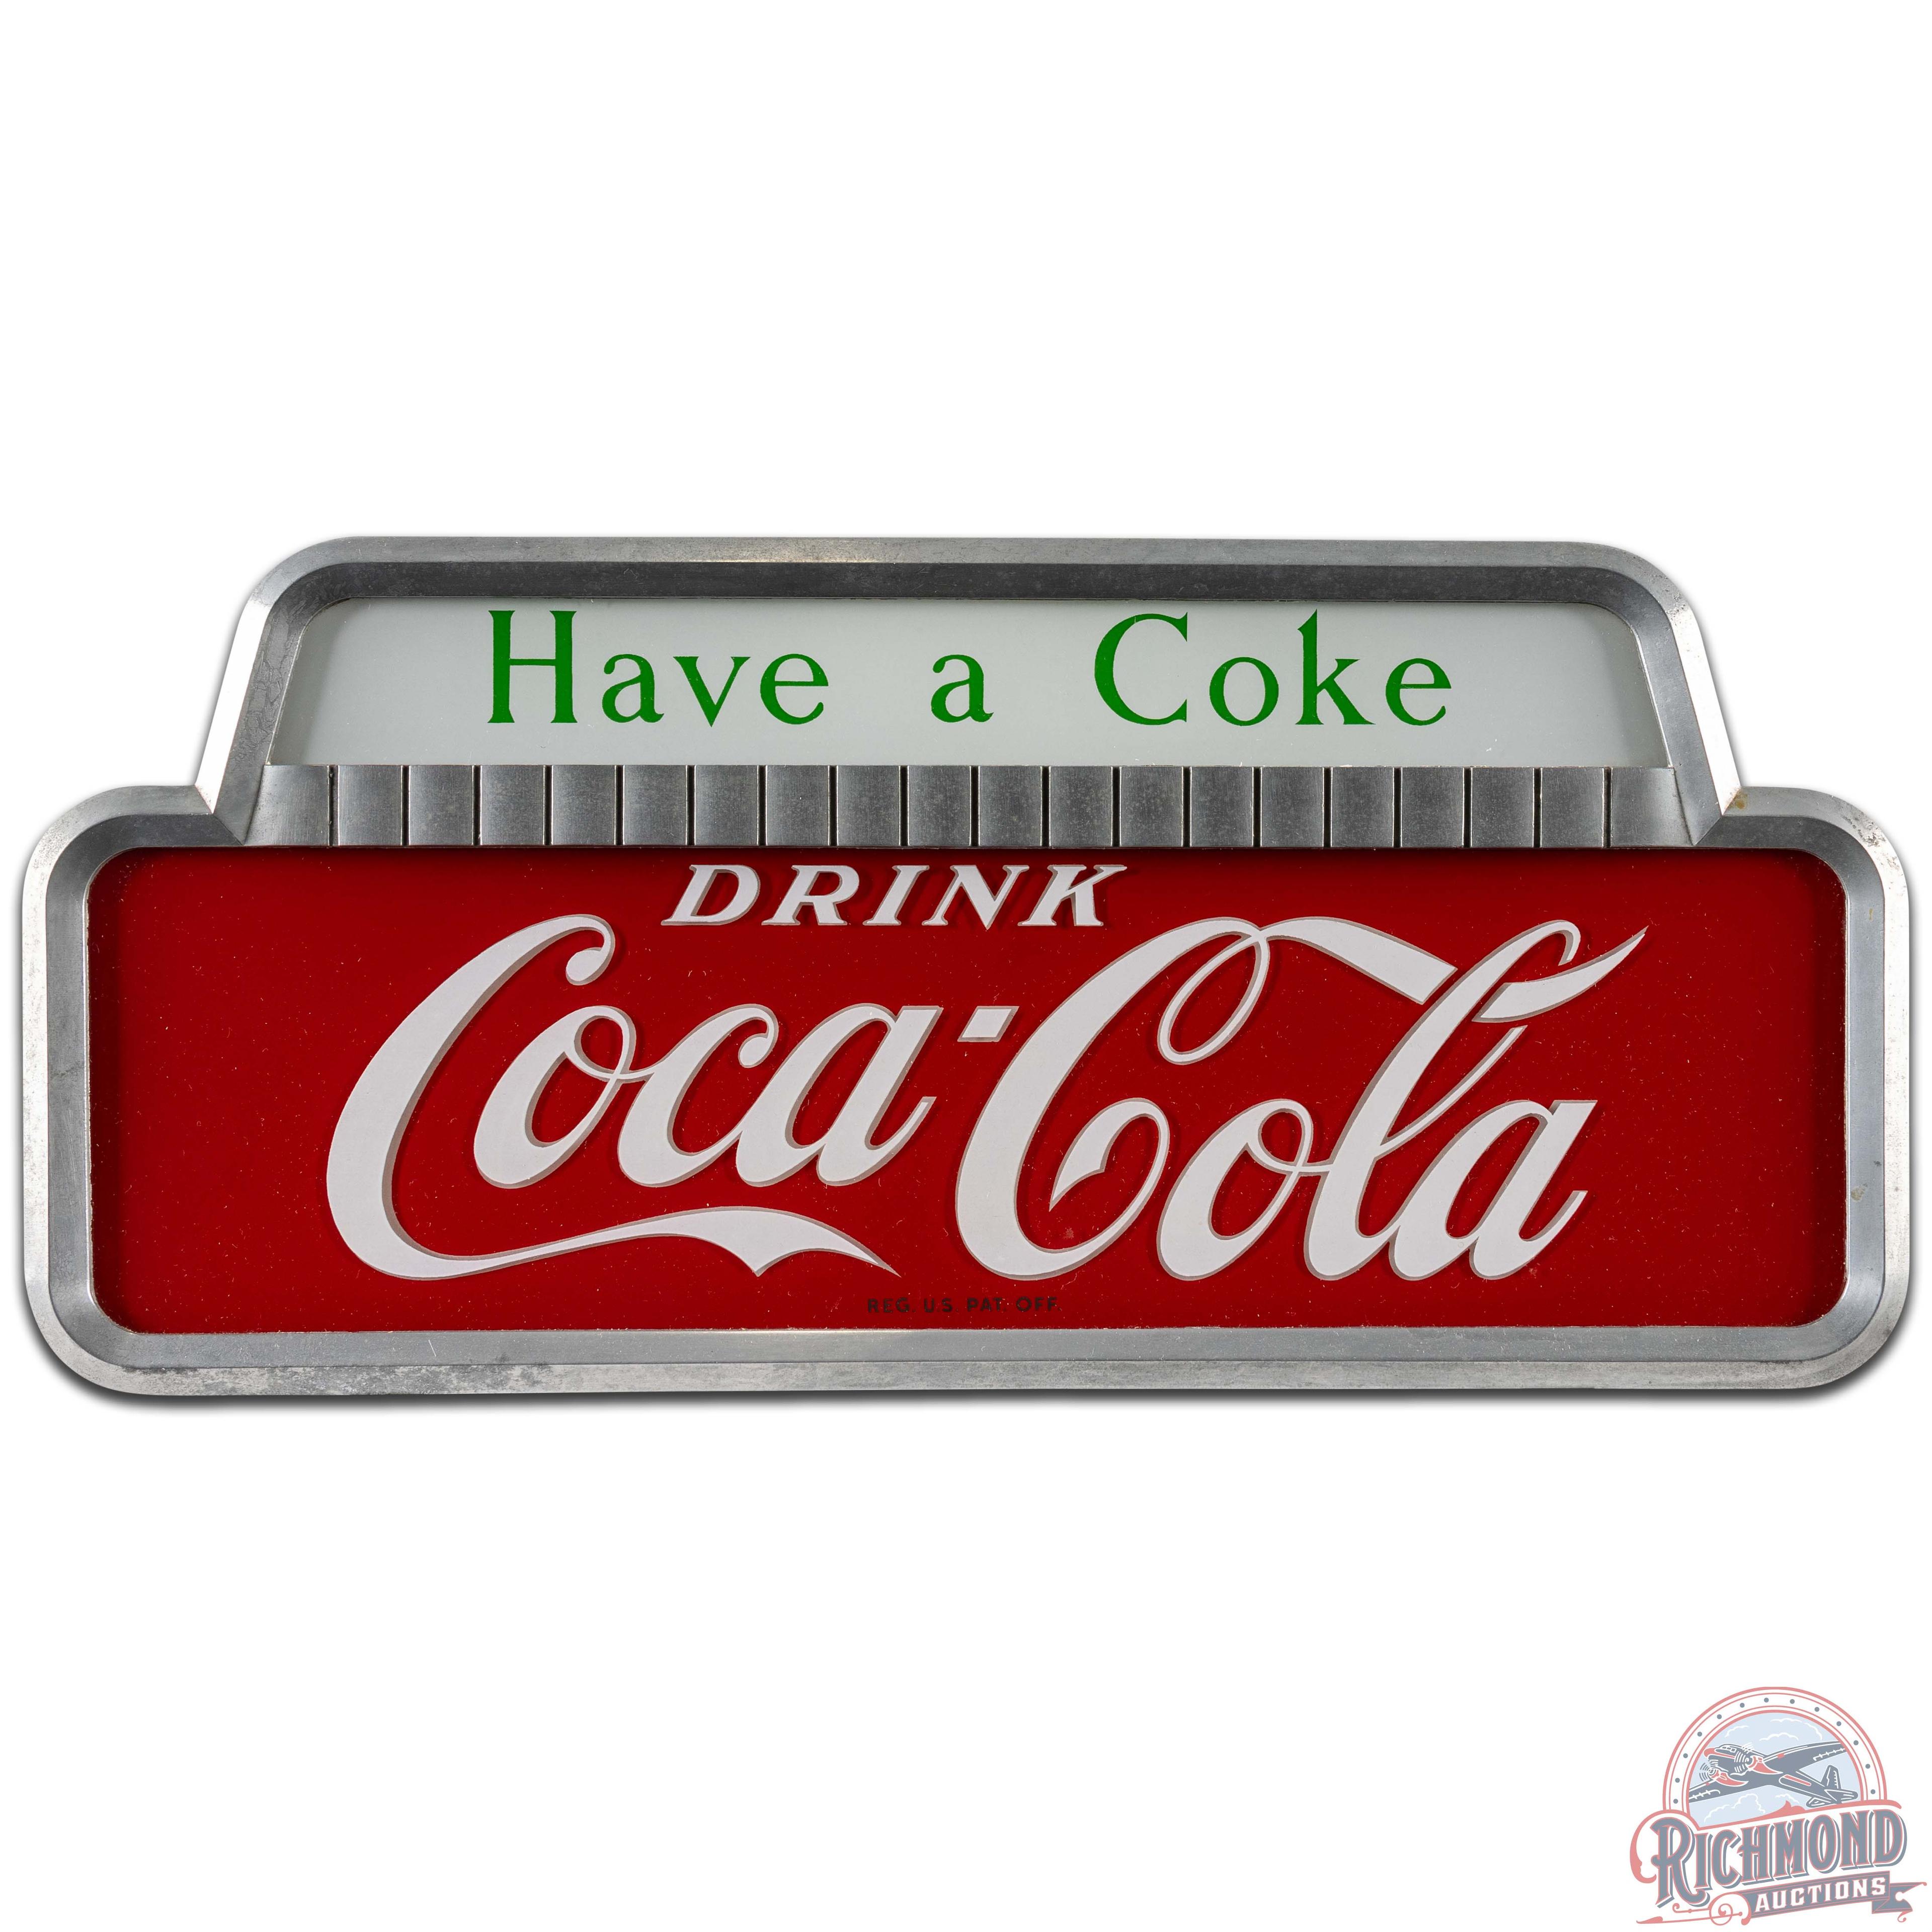 Have a Coke Drink Coca Cola Lighted Counter Top Display Sign